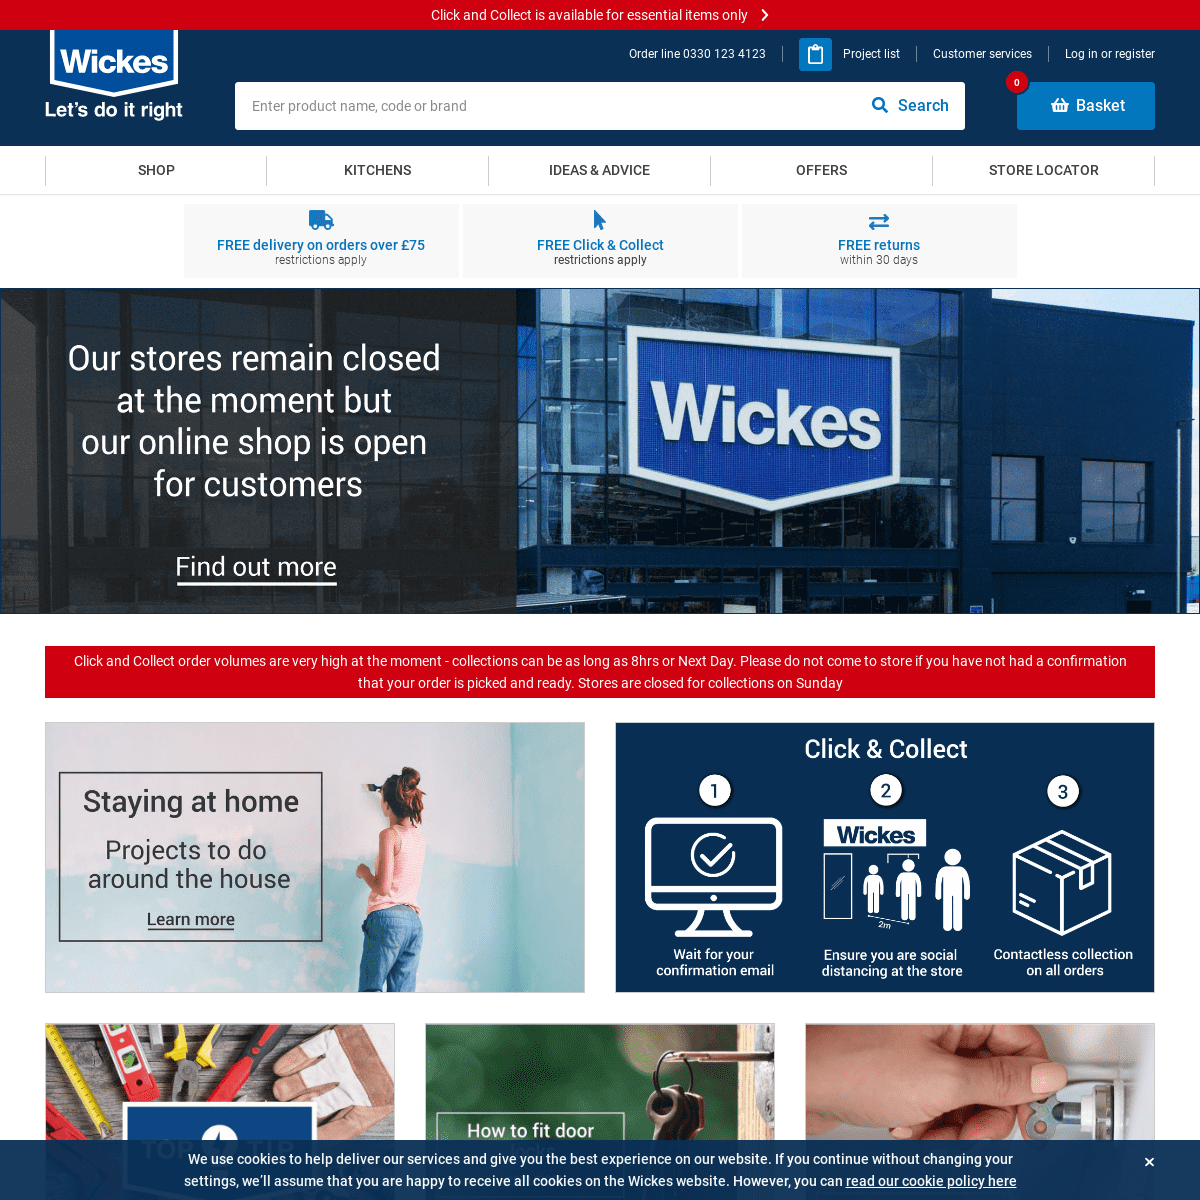 A complete backup of wickes.co.uk